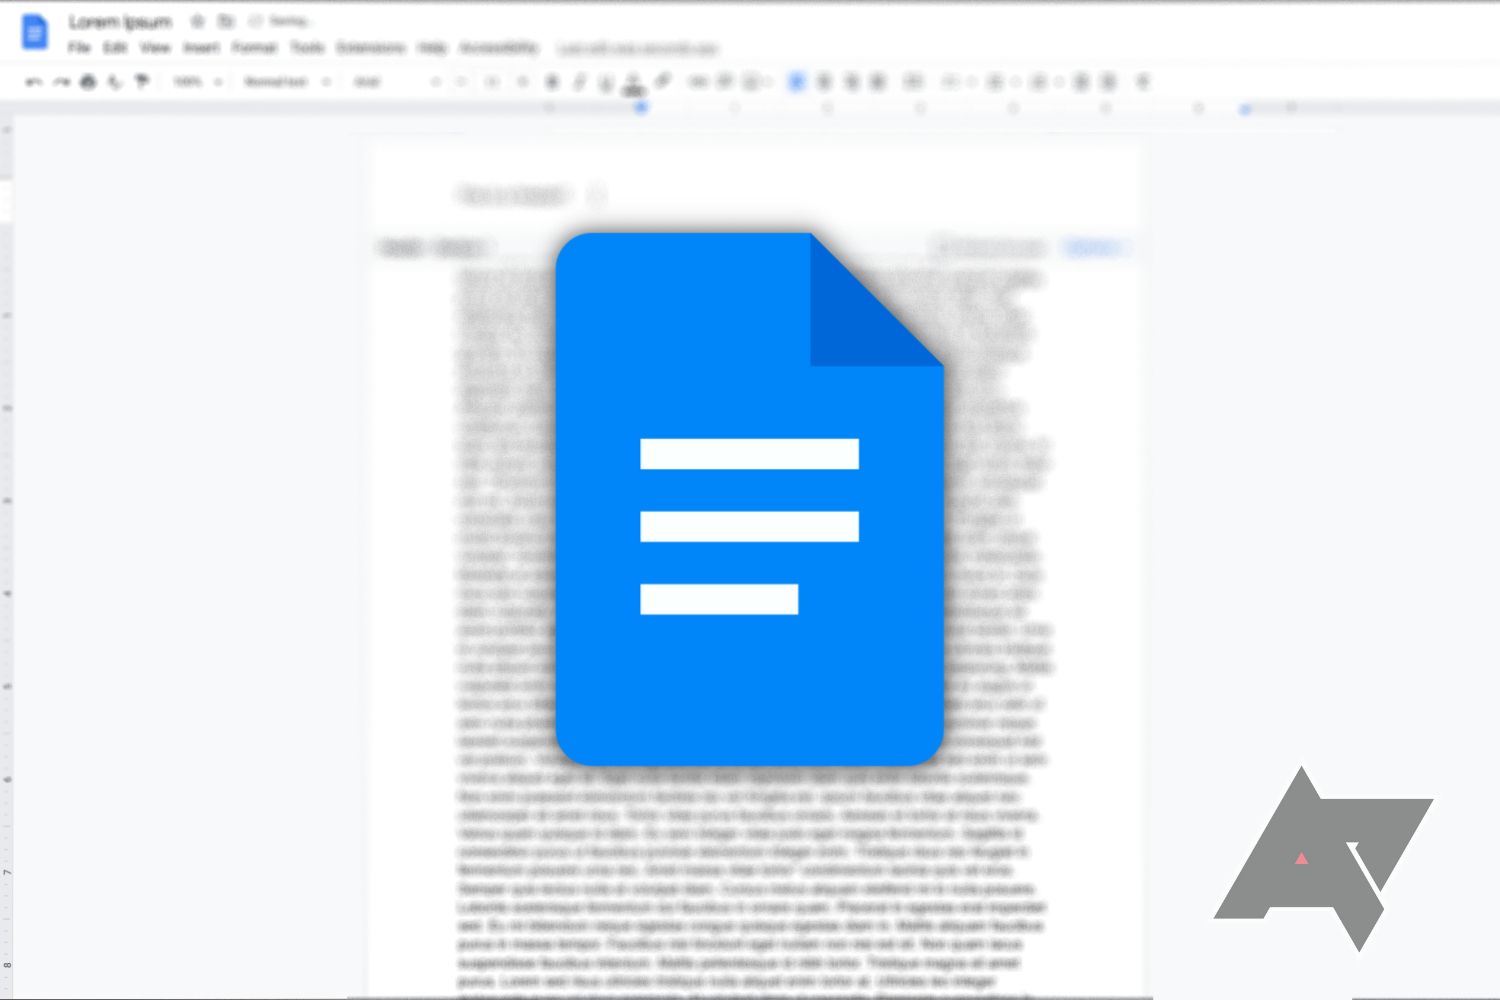 The Google Docs logo on top of a blurred image of a Google Docs document